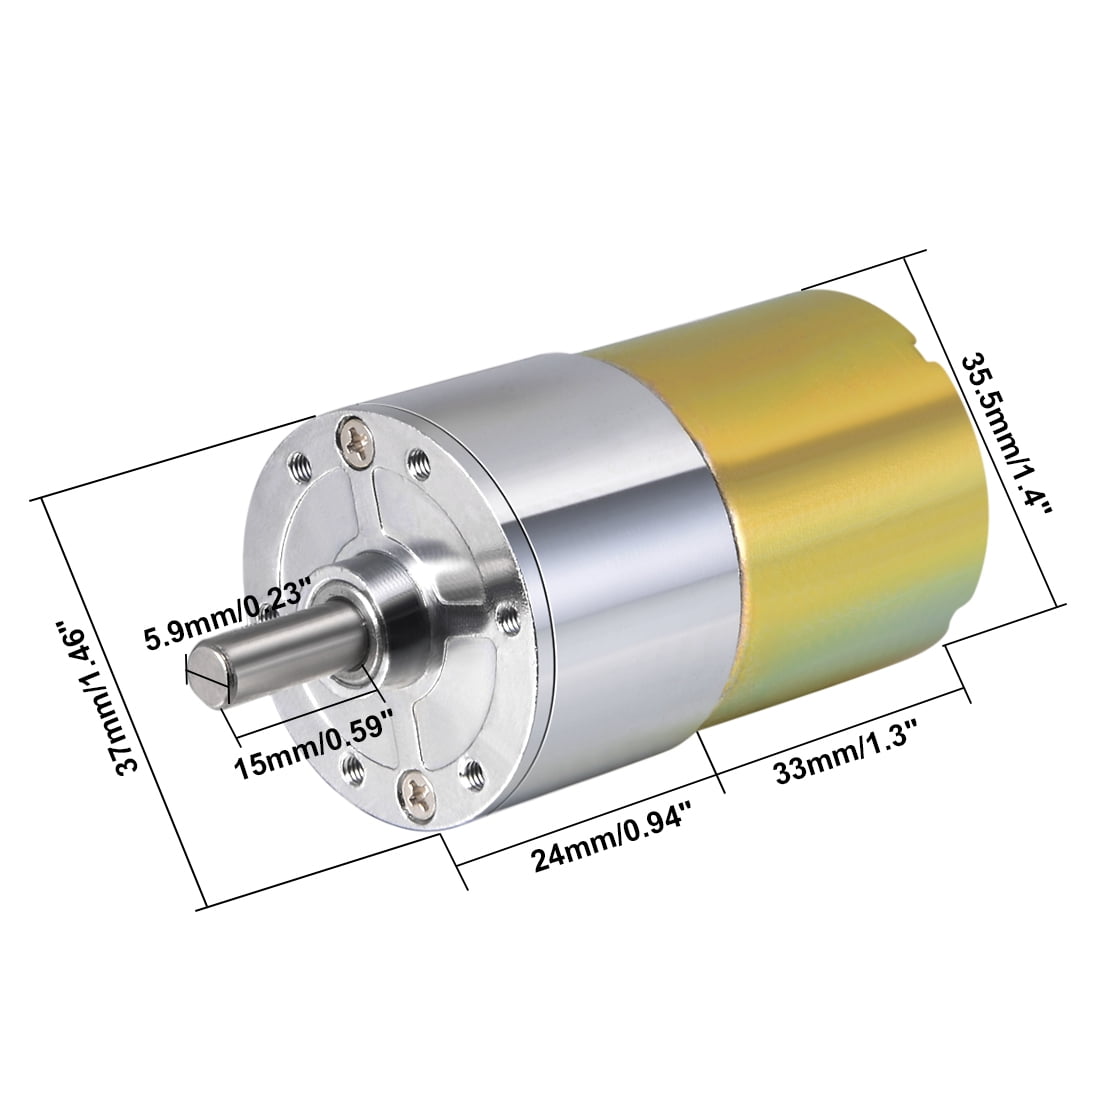 ICQUANZX DC Gear Motor 12V 200R High Torque Electric Micro Speed Reduction Geared Motor Centric Output Shaft Diameter Gearbox 